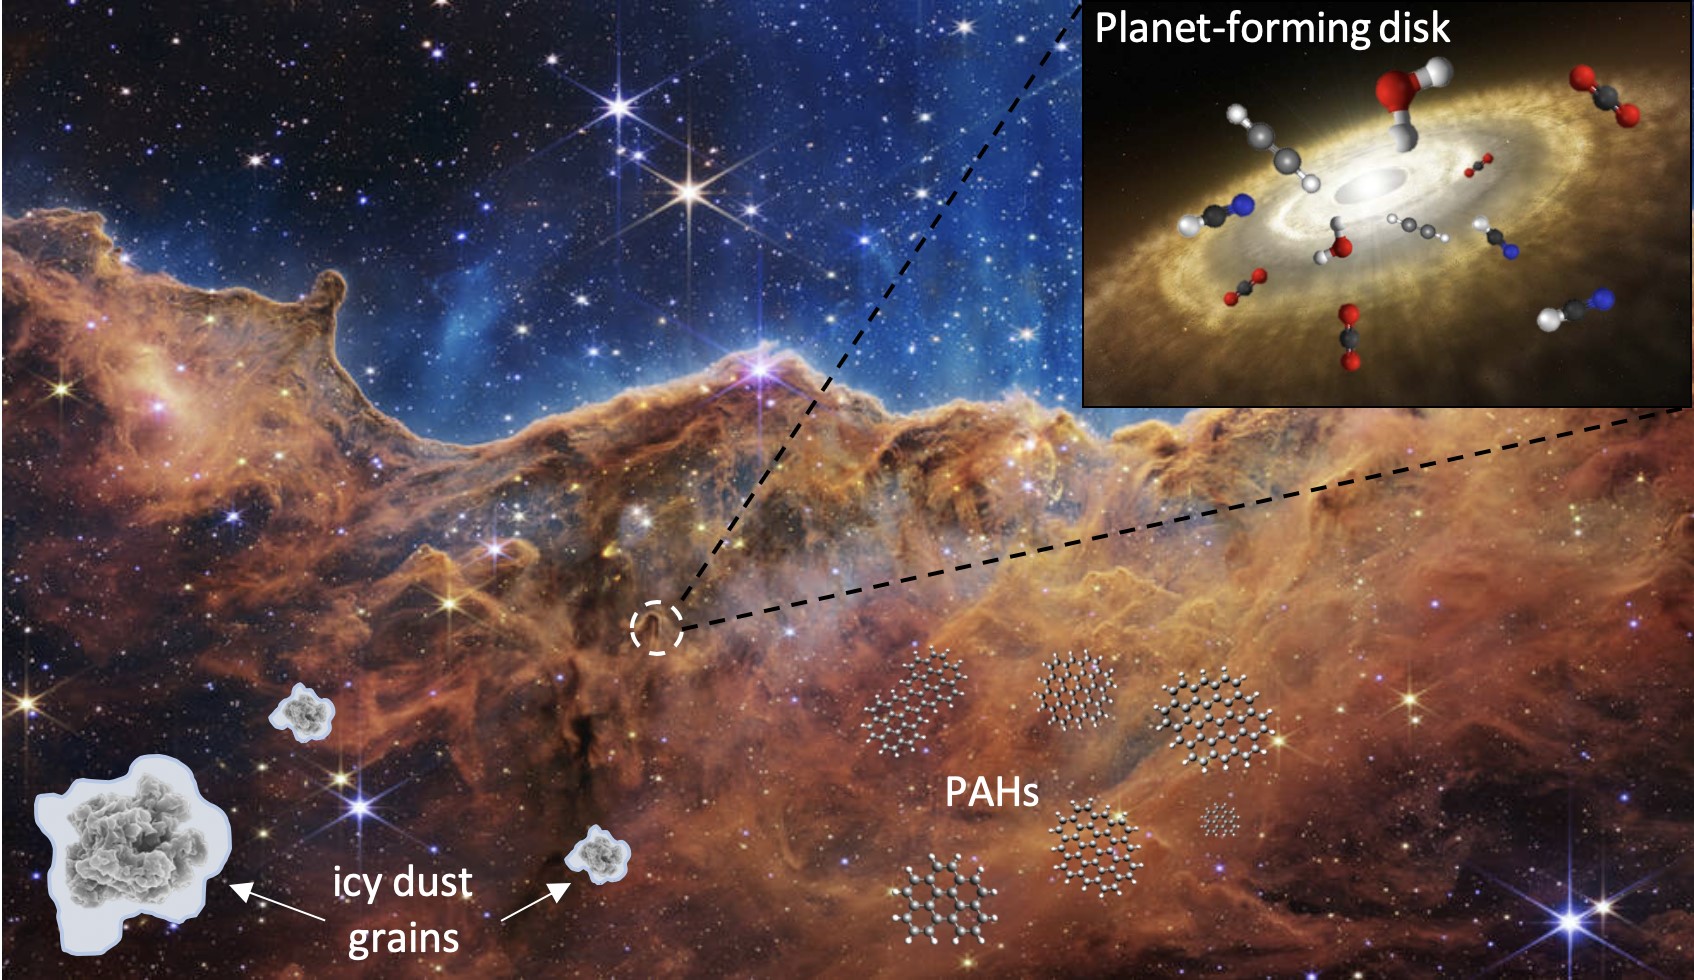 The lifecycle of matter in the interstellar medium. As dust grains and PAH molecules grow from the interstellar medium to the molecular cloud phase and eventually to planet forming disks around newly formed stars, the ice and gas composition will evolve along and carry the memory of that history. Credits: NASA, ESA, CSA, and STScI; Larry Nittler.